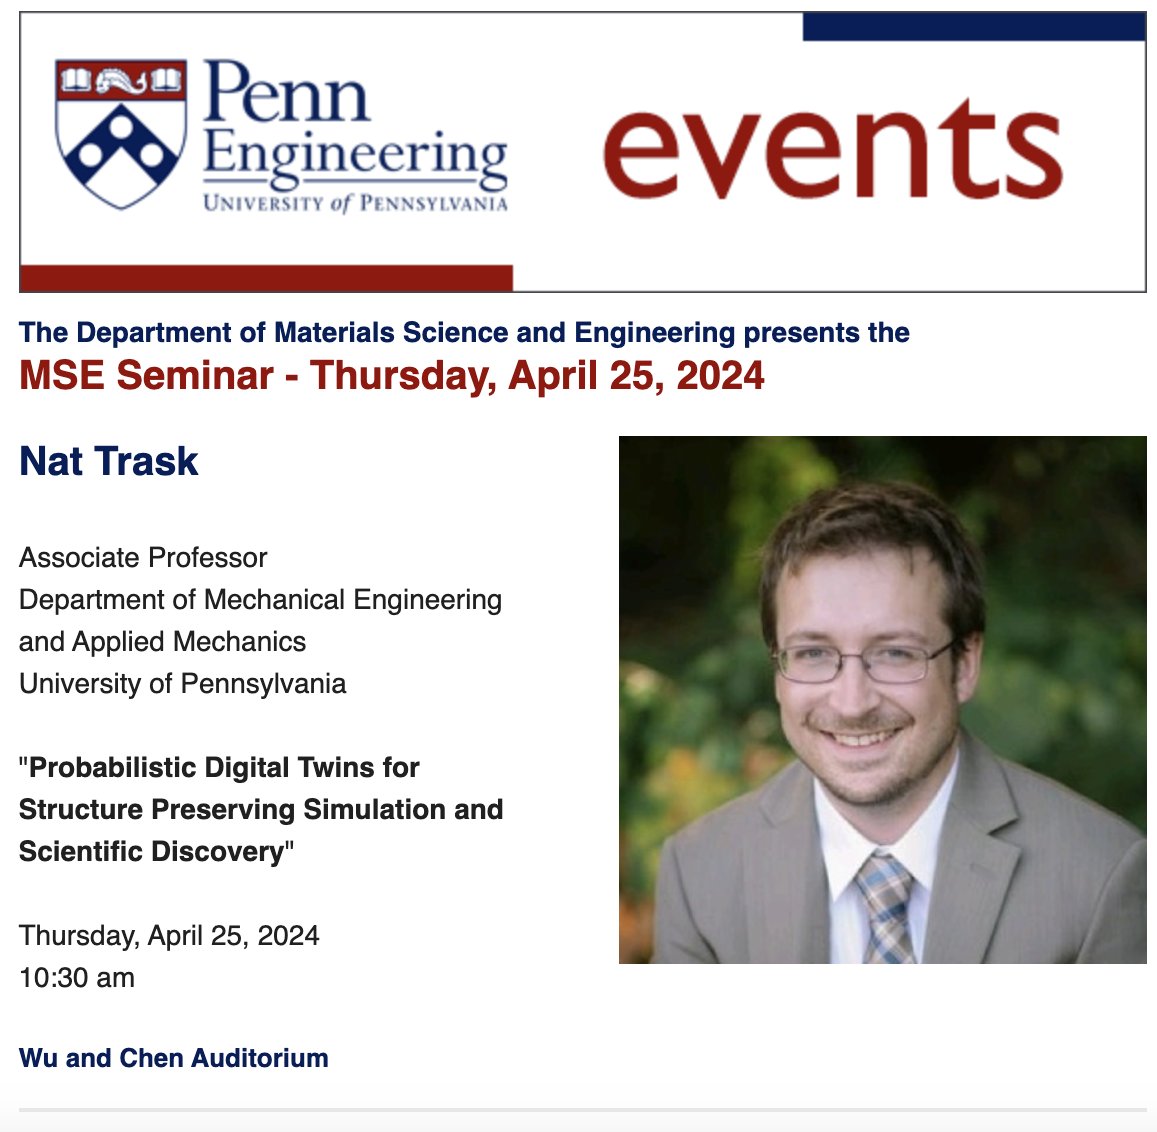 @MSEatPenn is excited to host Nat Trask, @MEAM_Penn Associate Professor for his seminar: 'Probabilistic Digital Twins for Structure Preserving Simulation and Scientific Discovery' Thursday, April 25, 10:30 am Wu and Chen Auditorium Levine Hall